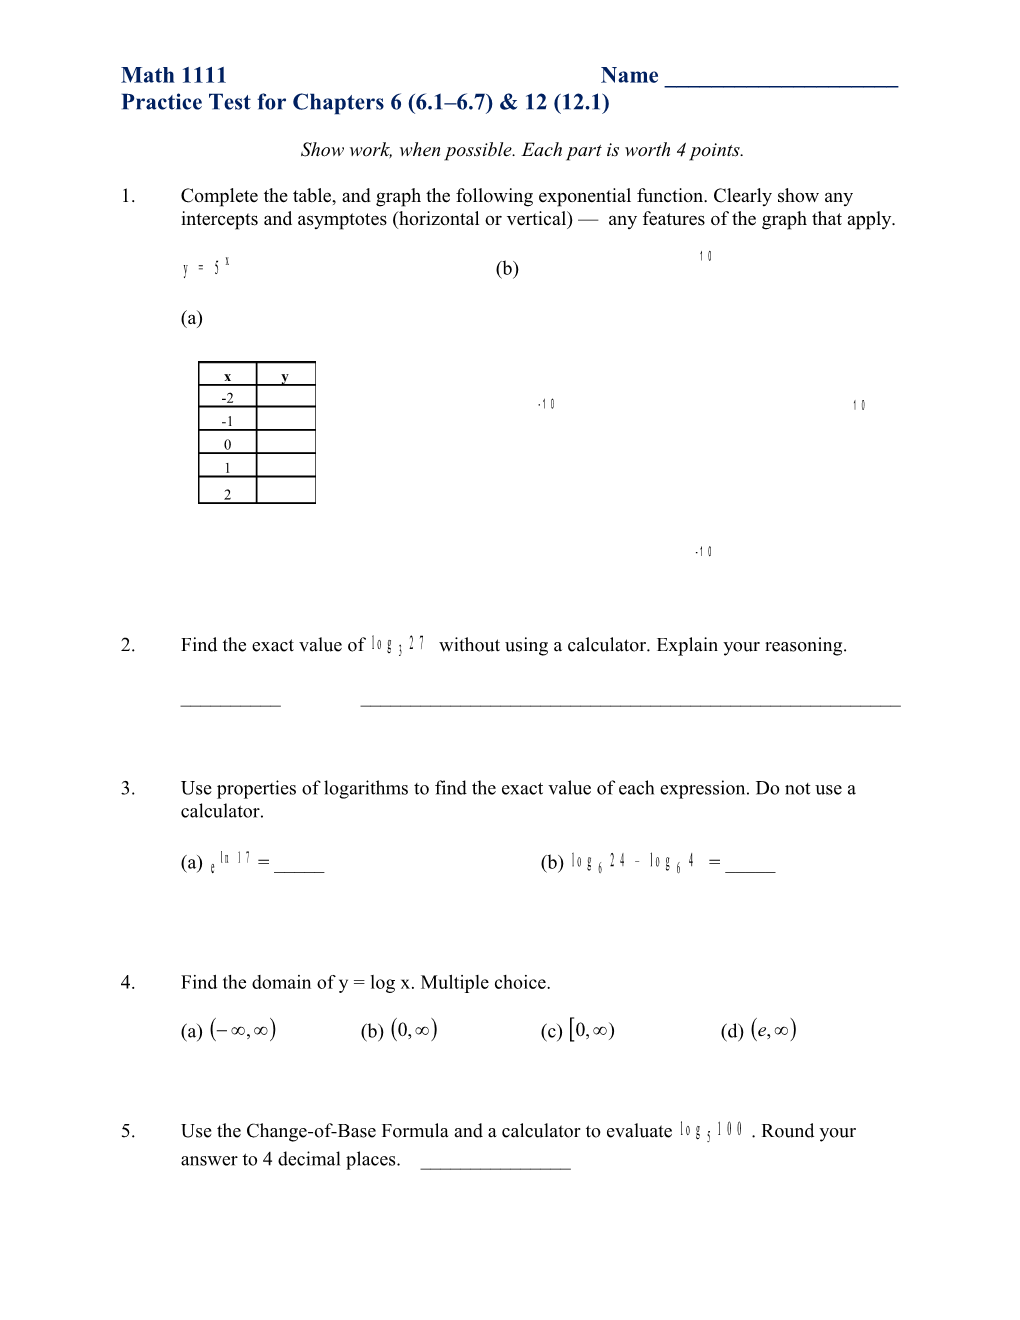 Practice Test for Chapters 6 (6.1 6.7) & 12 (12.1)